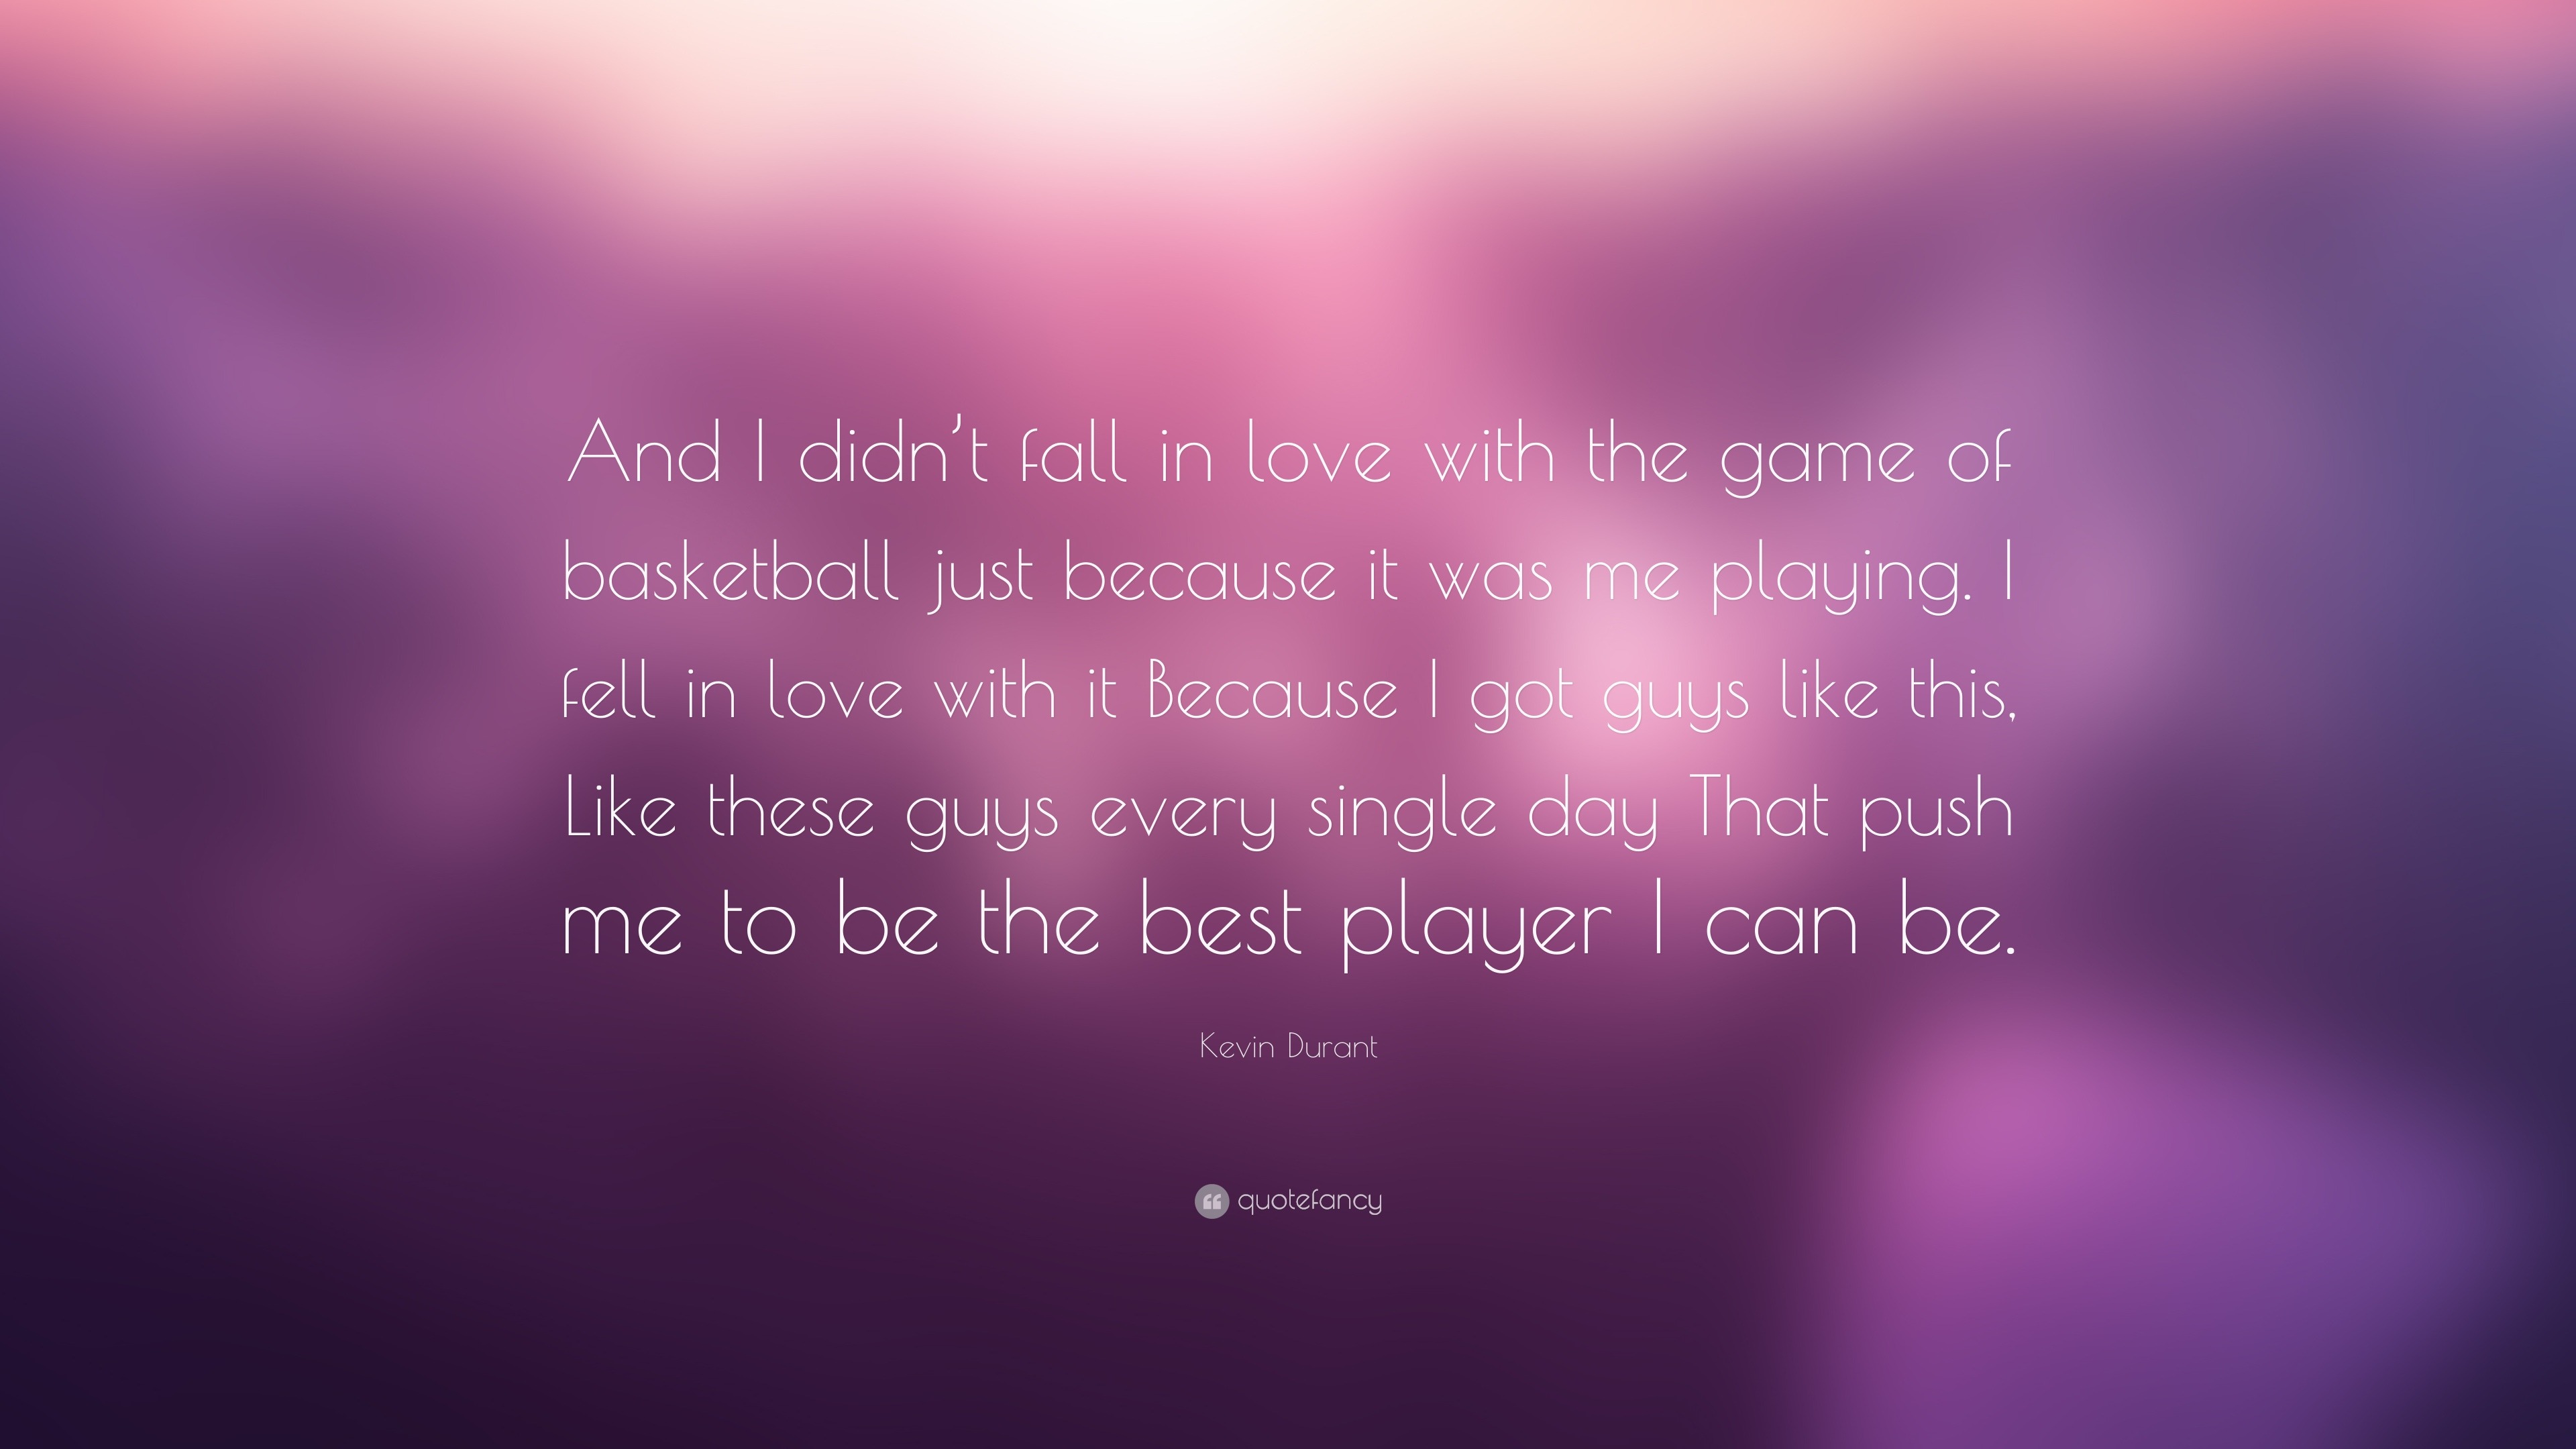 Kevin Durant Quote “And I didn t fall in love with the game